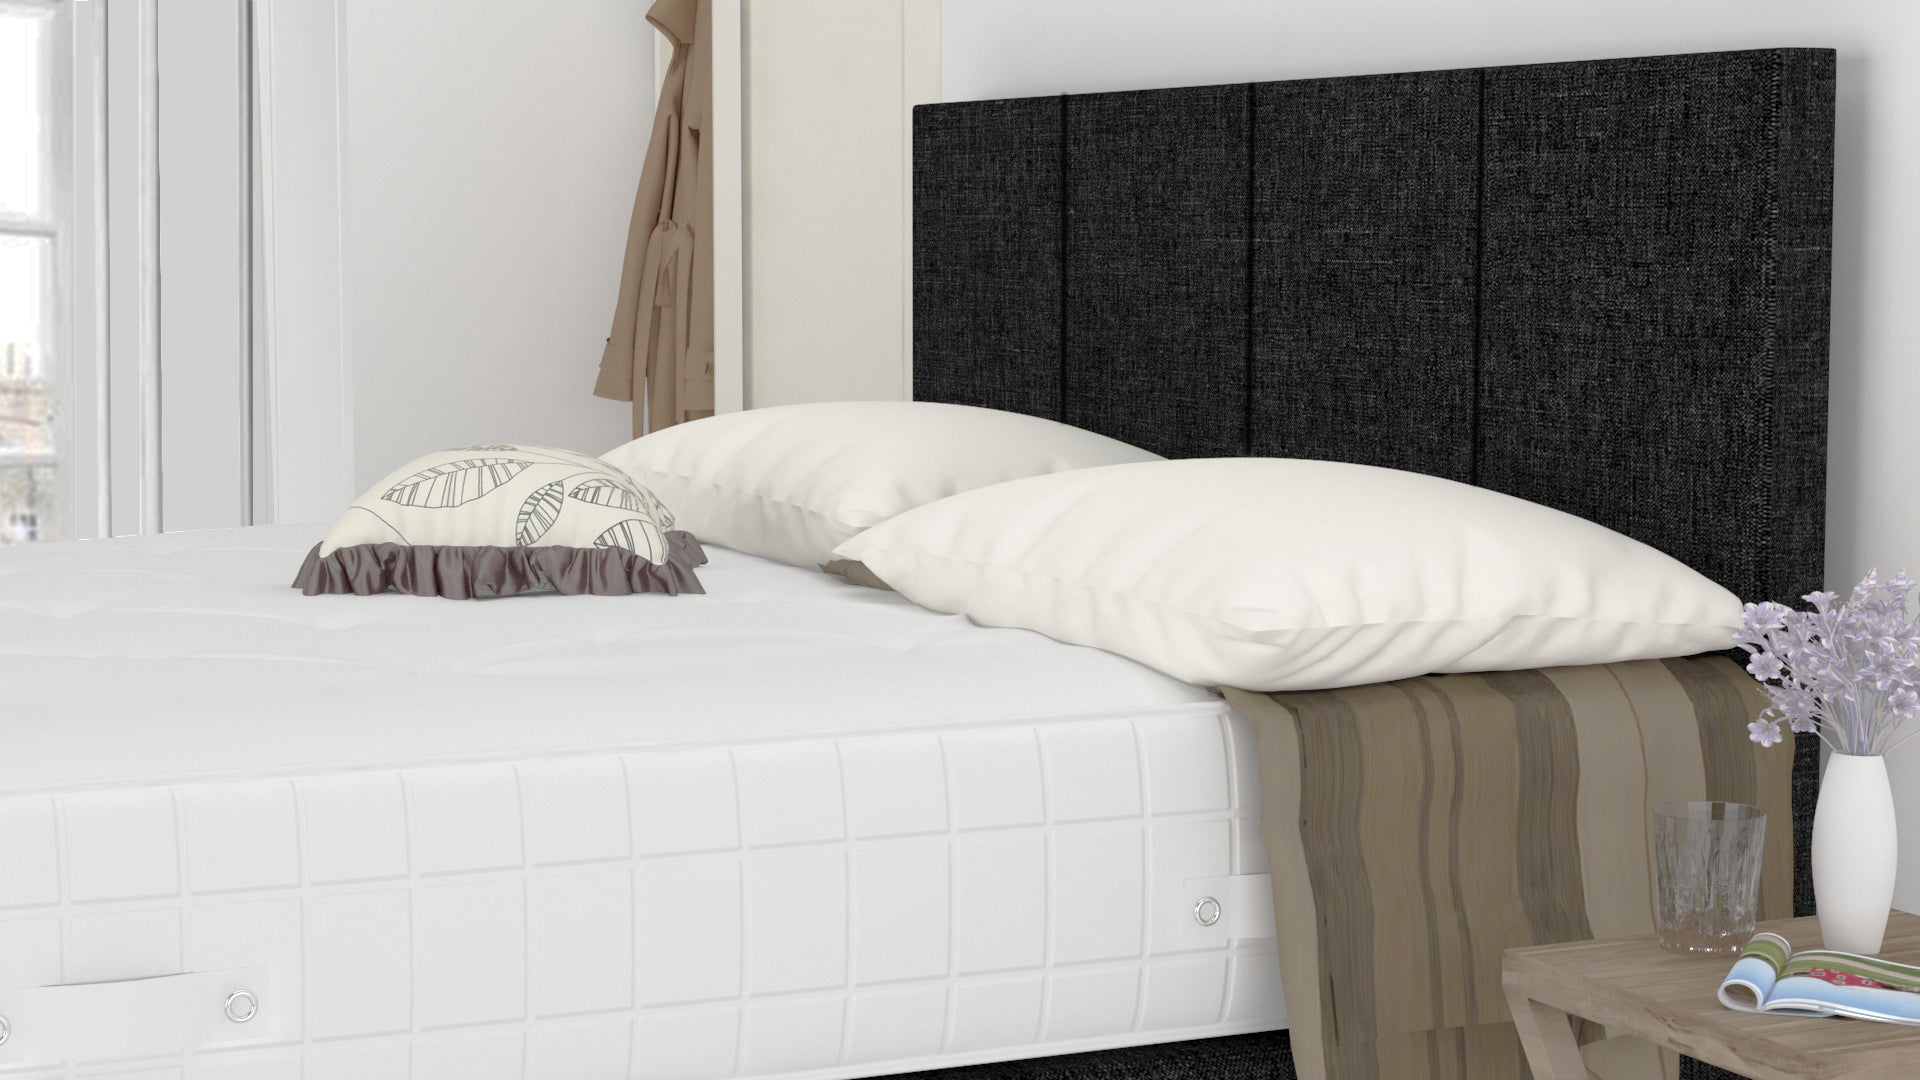 Black Venice 5 Feet Divan Bed Set With 4 Panel Headboard (Included Feet) And Free Tinsel Top Mattress